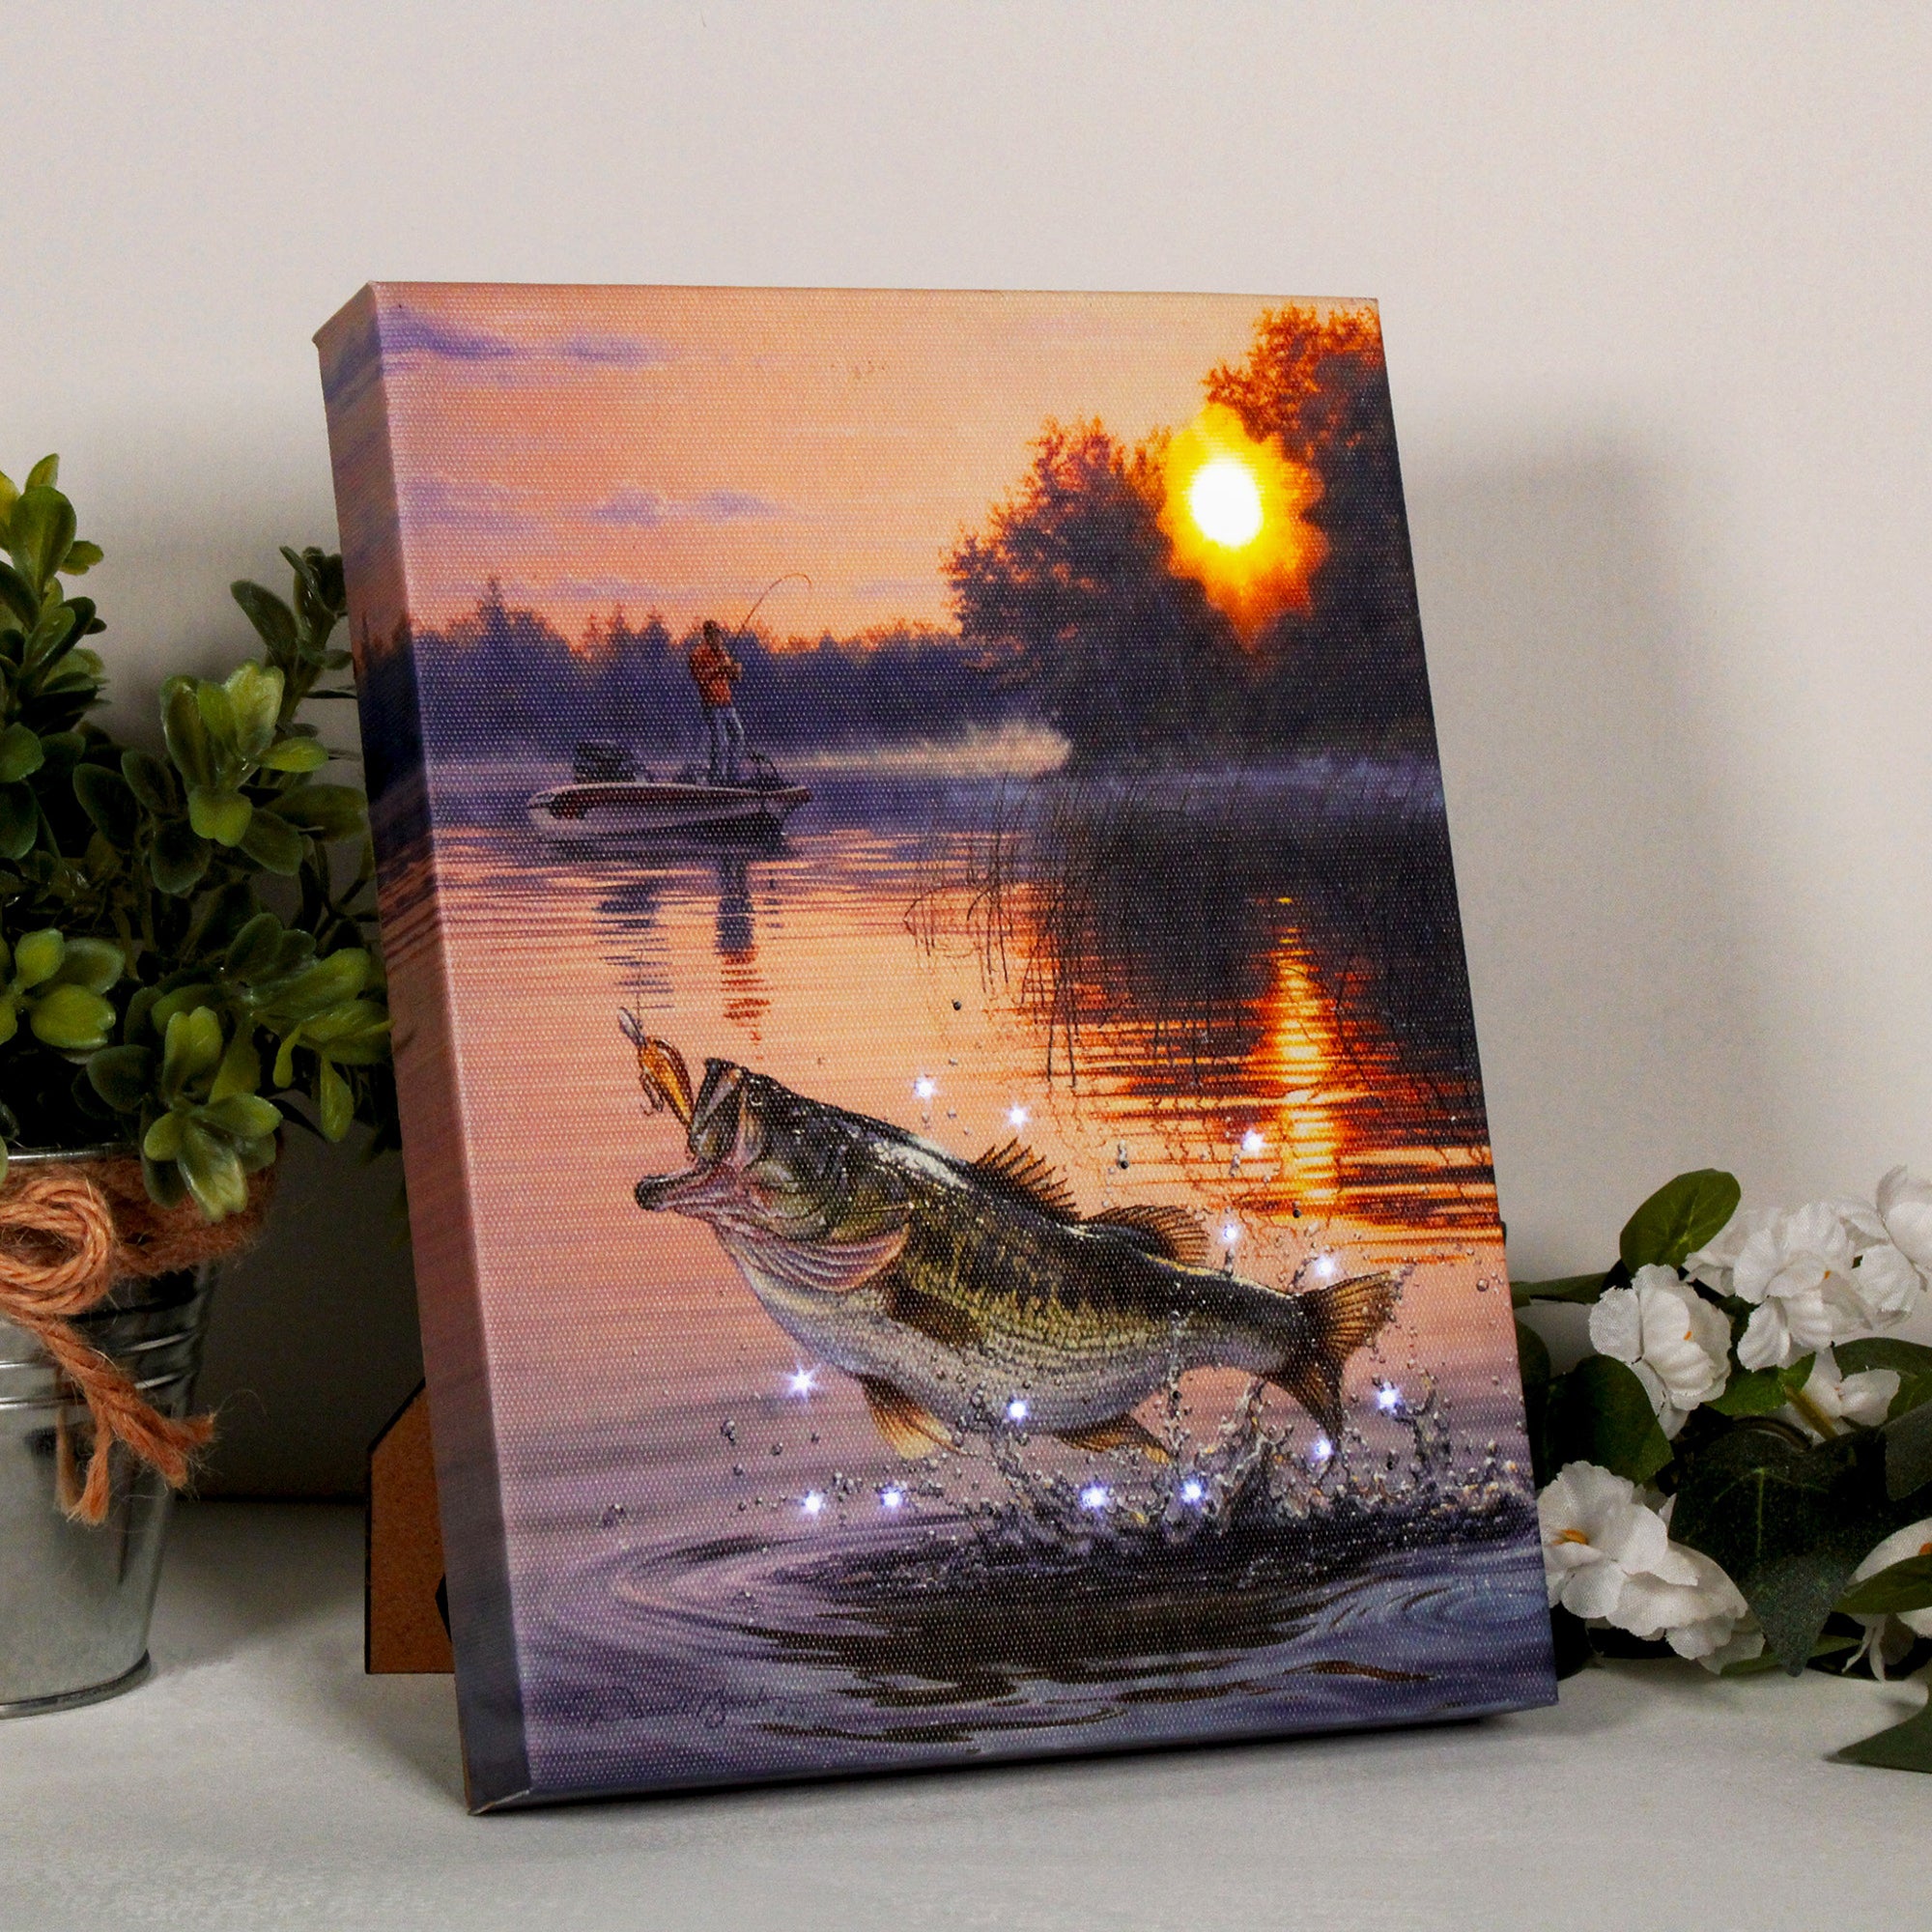 Early Catch 8x6 Lighted Tabletop Canvas